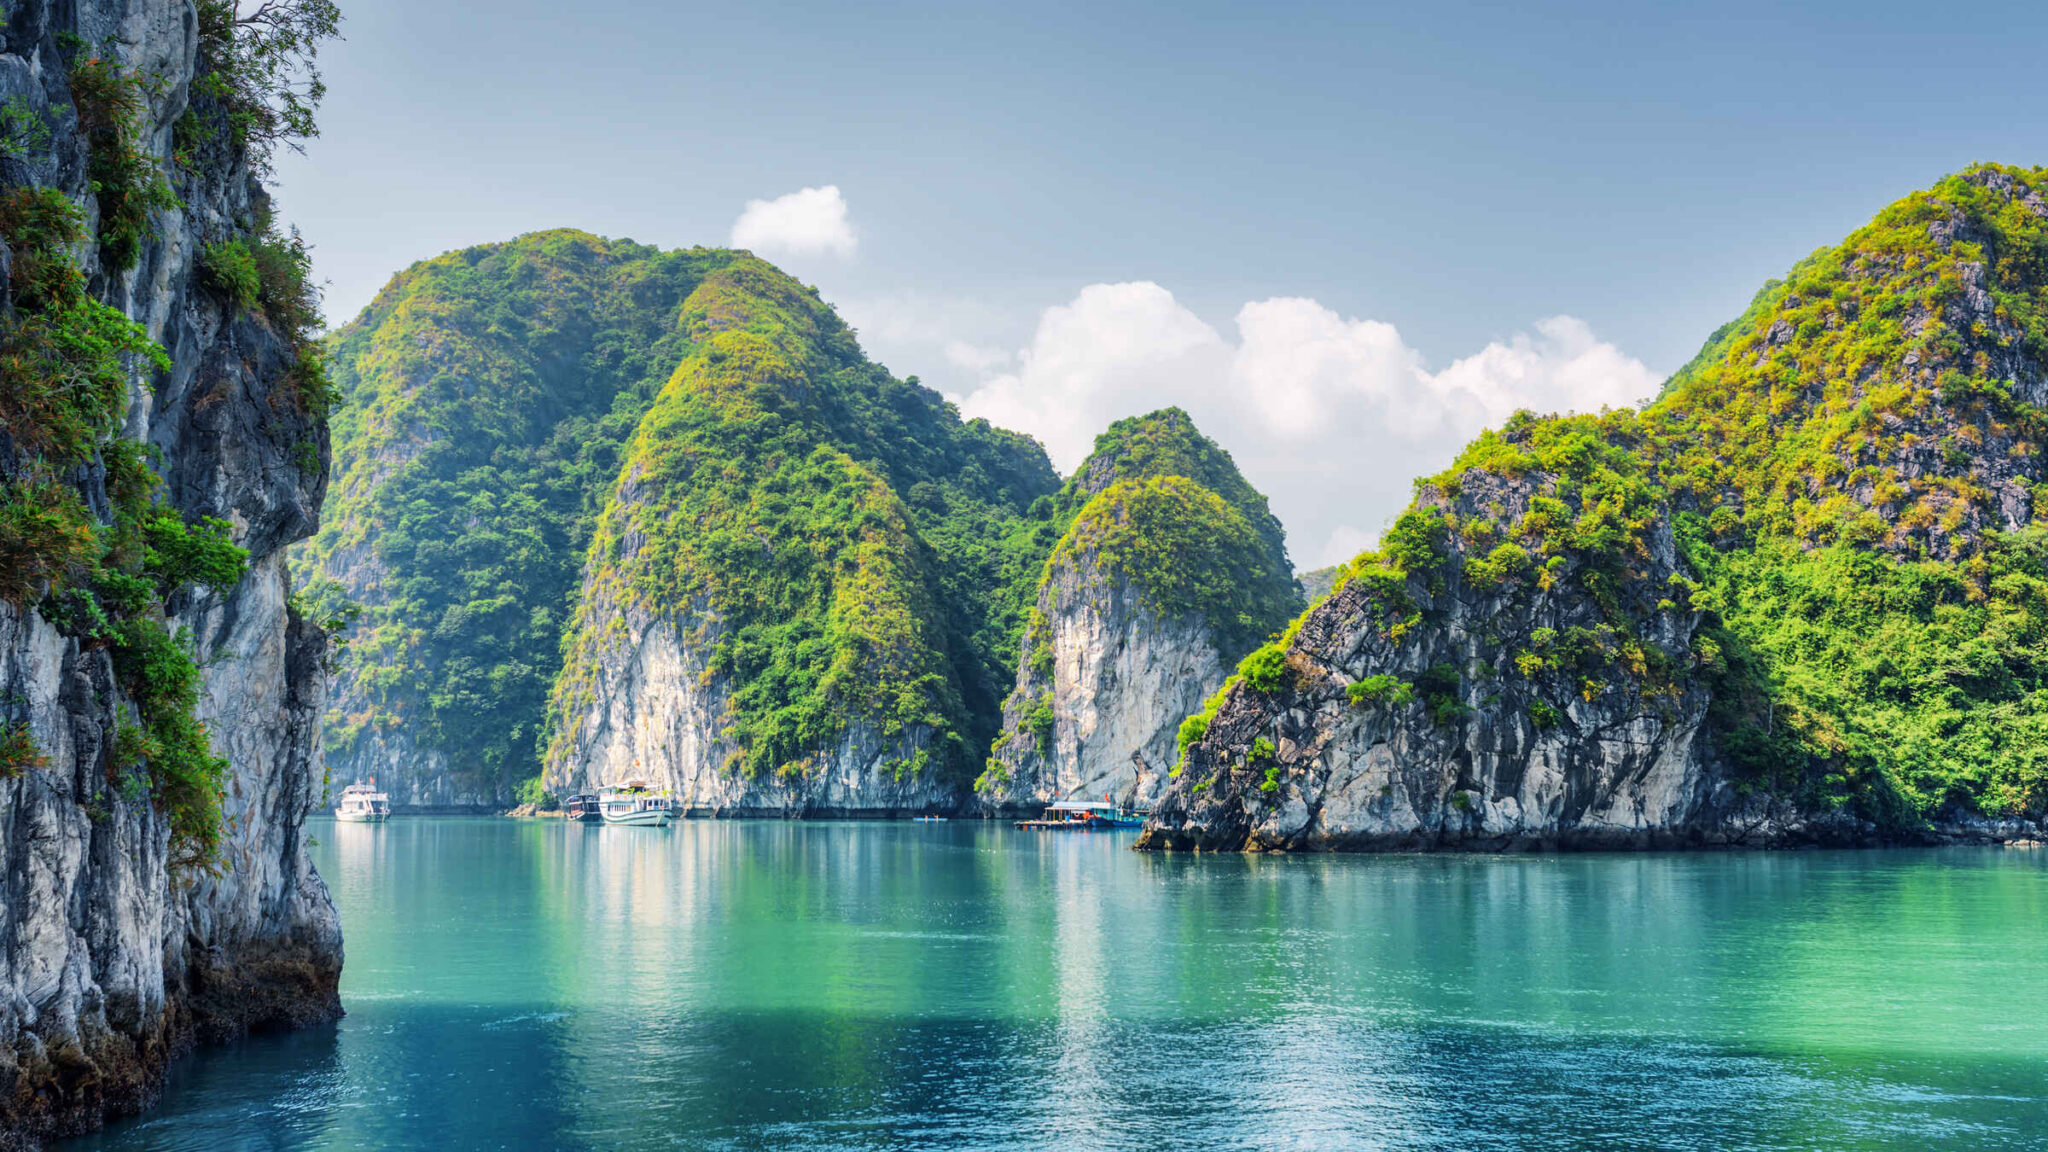 Some Things You Should Know Before Visiting Halong Bay